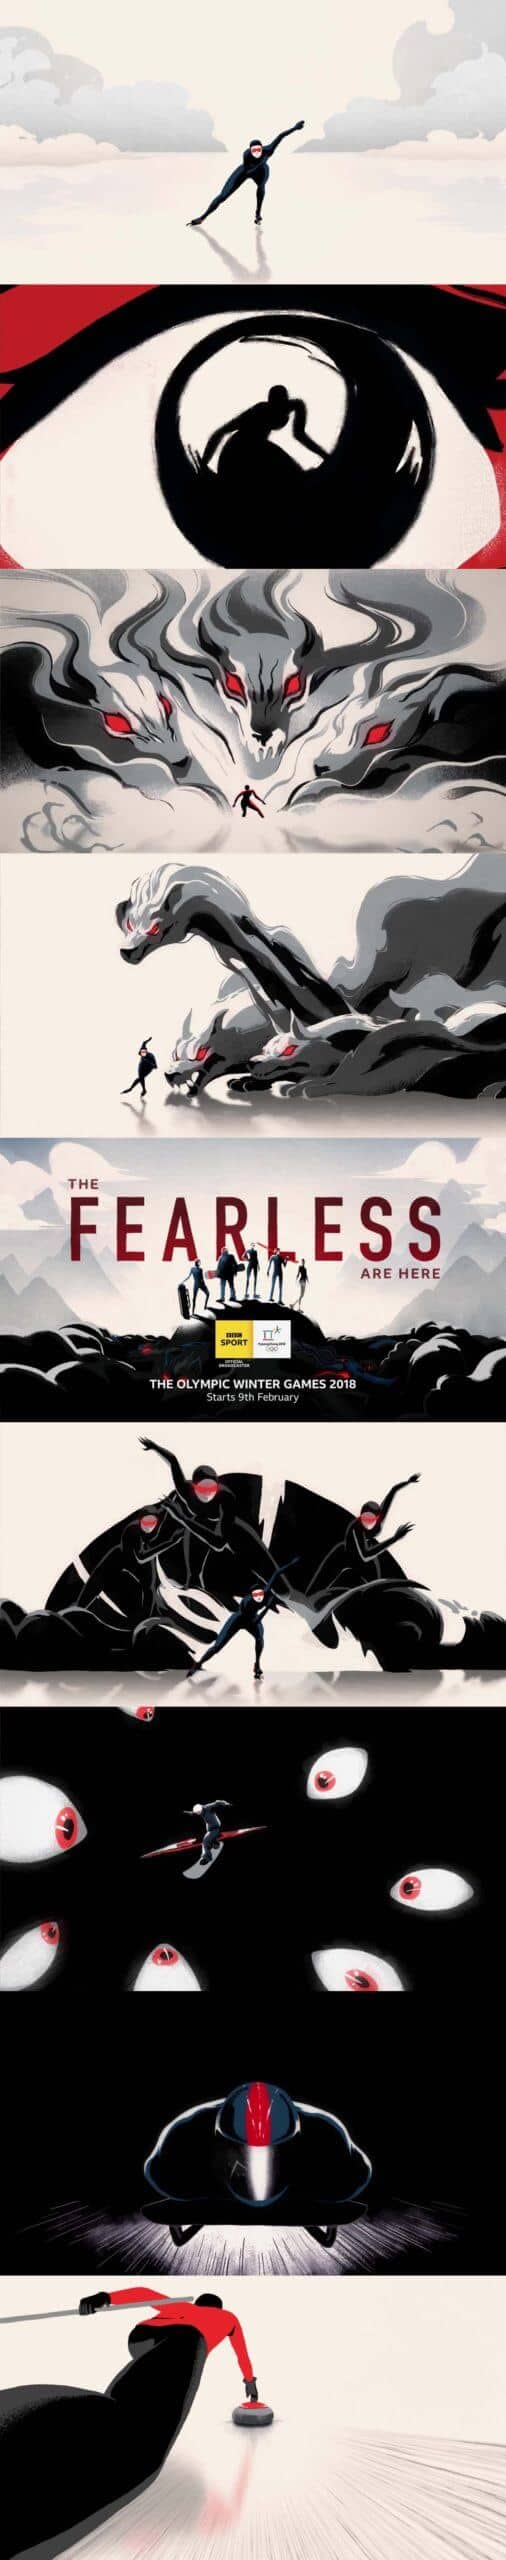 BBC Winter Olympics %E2%80%93 The Fearless are Here scaled